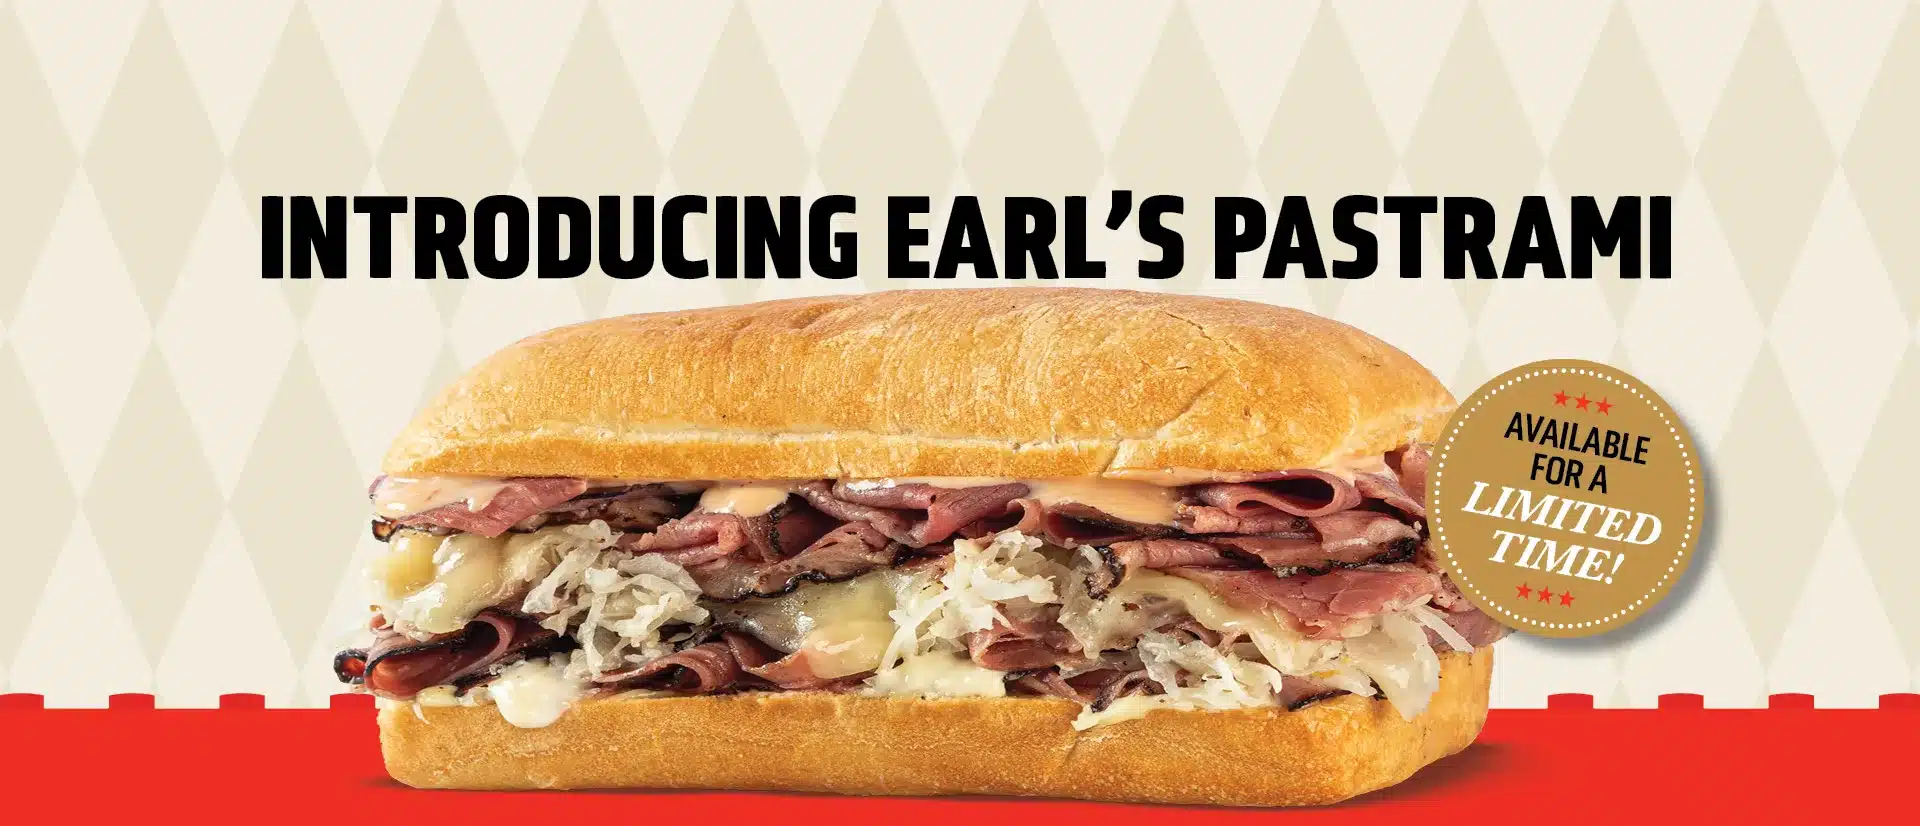 Introducing Earl's Pastrami Available for a limited time!